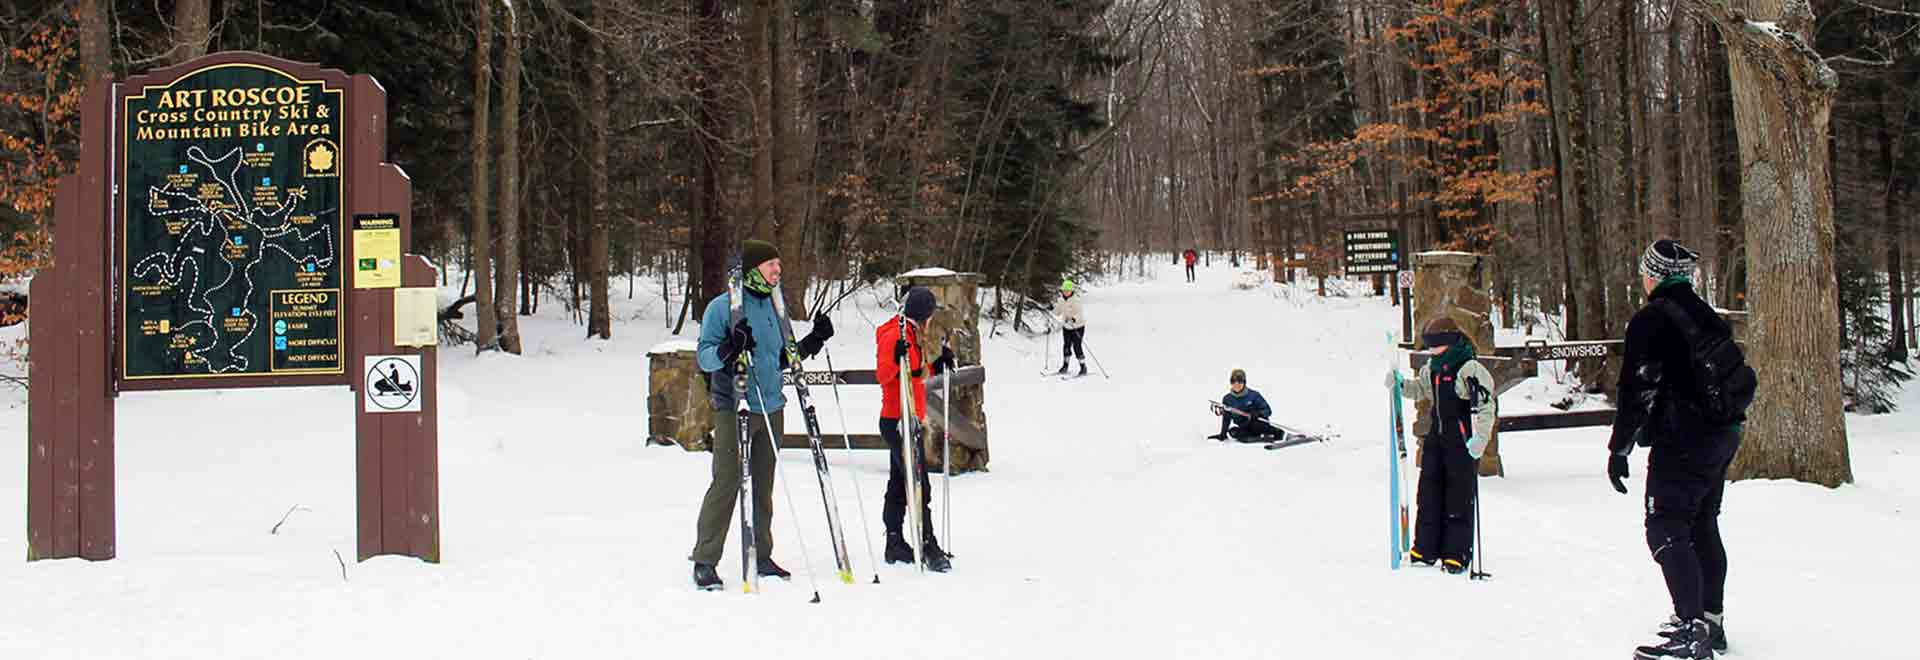 Cross Country Skiing at the Art Roscoe Area at Allegany State Park